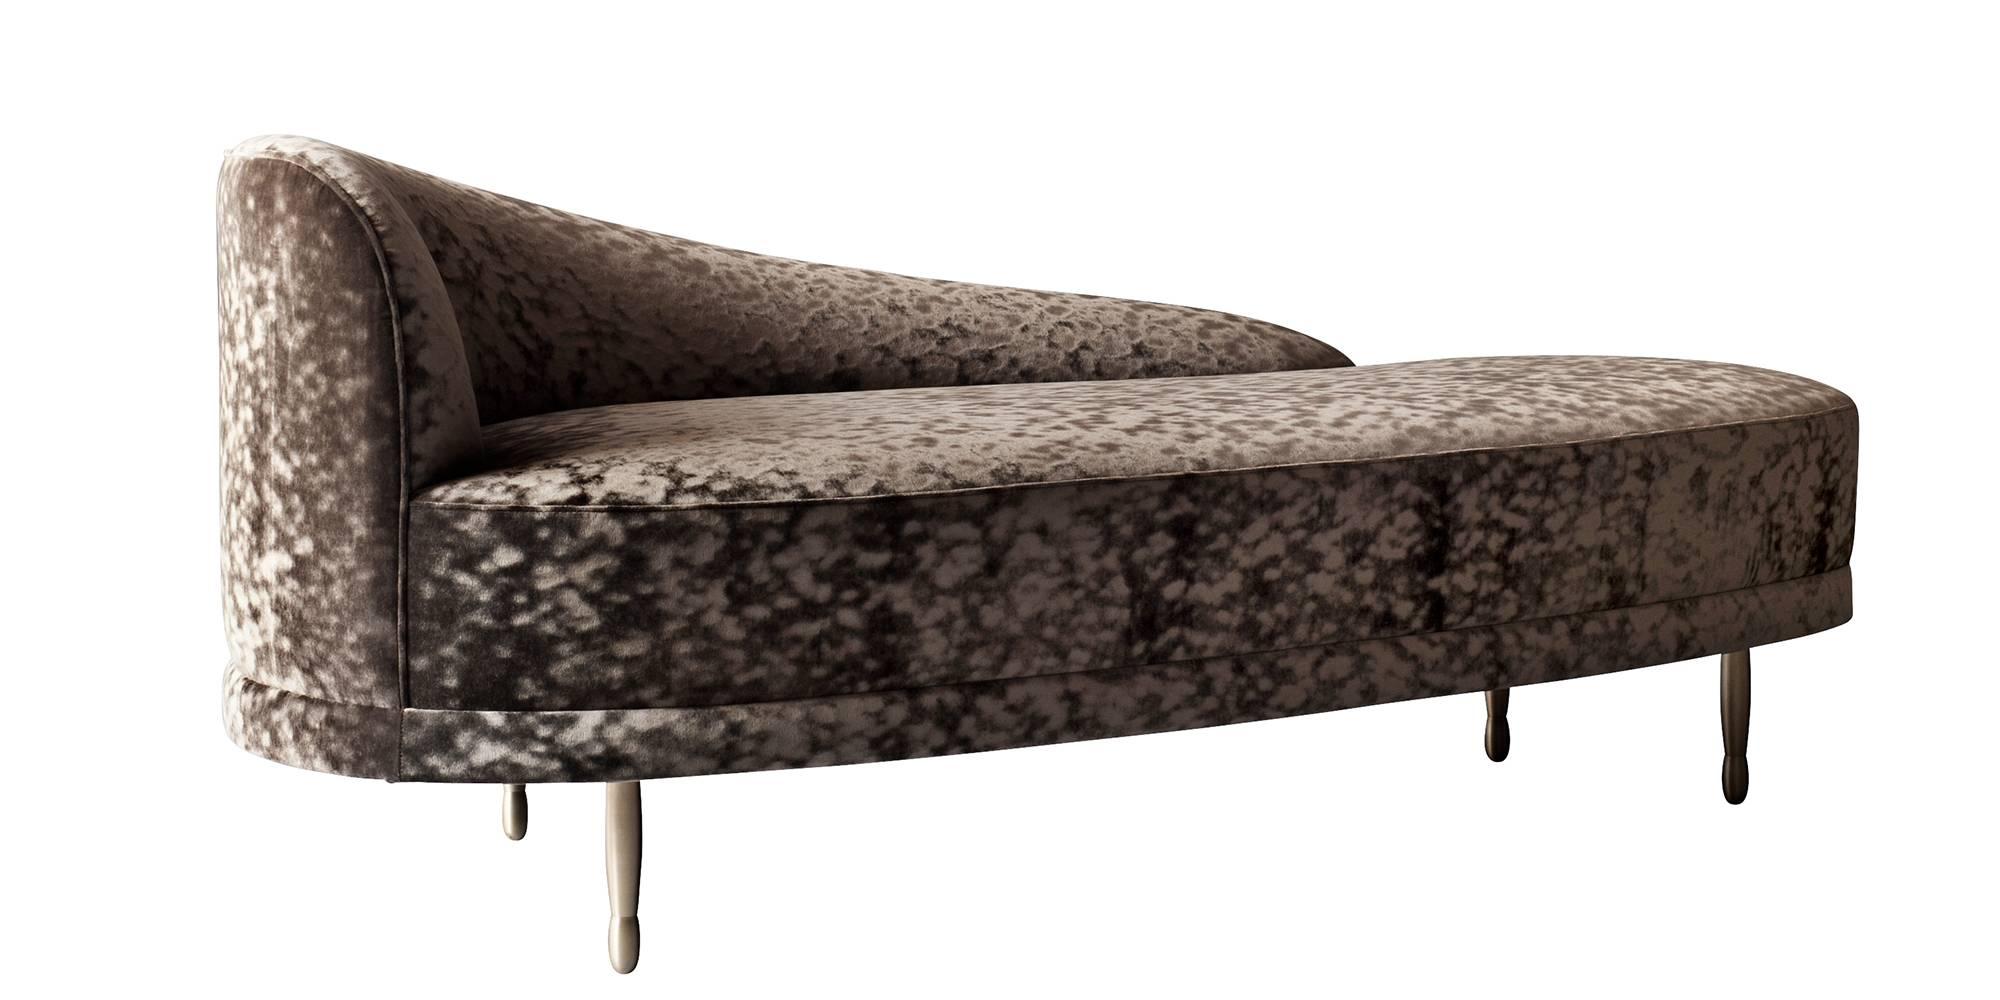 The Claire Chaise by DeMuro Das has a curved back and seat and sculptural solid bronze legs in Satin finish. Construction includes solid hardwood frame with European webbing and multi-density foam.

Pricing is quoted COM - does not include fabric